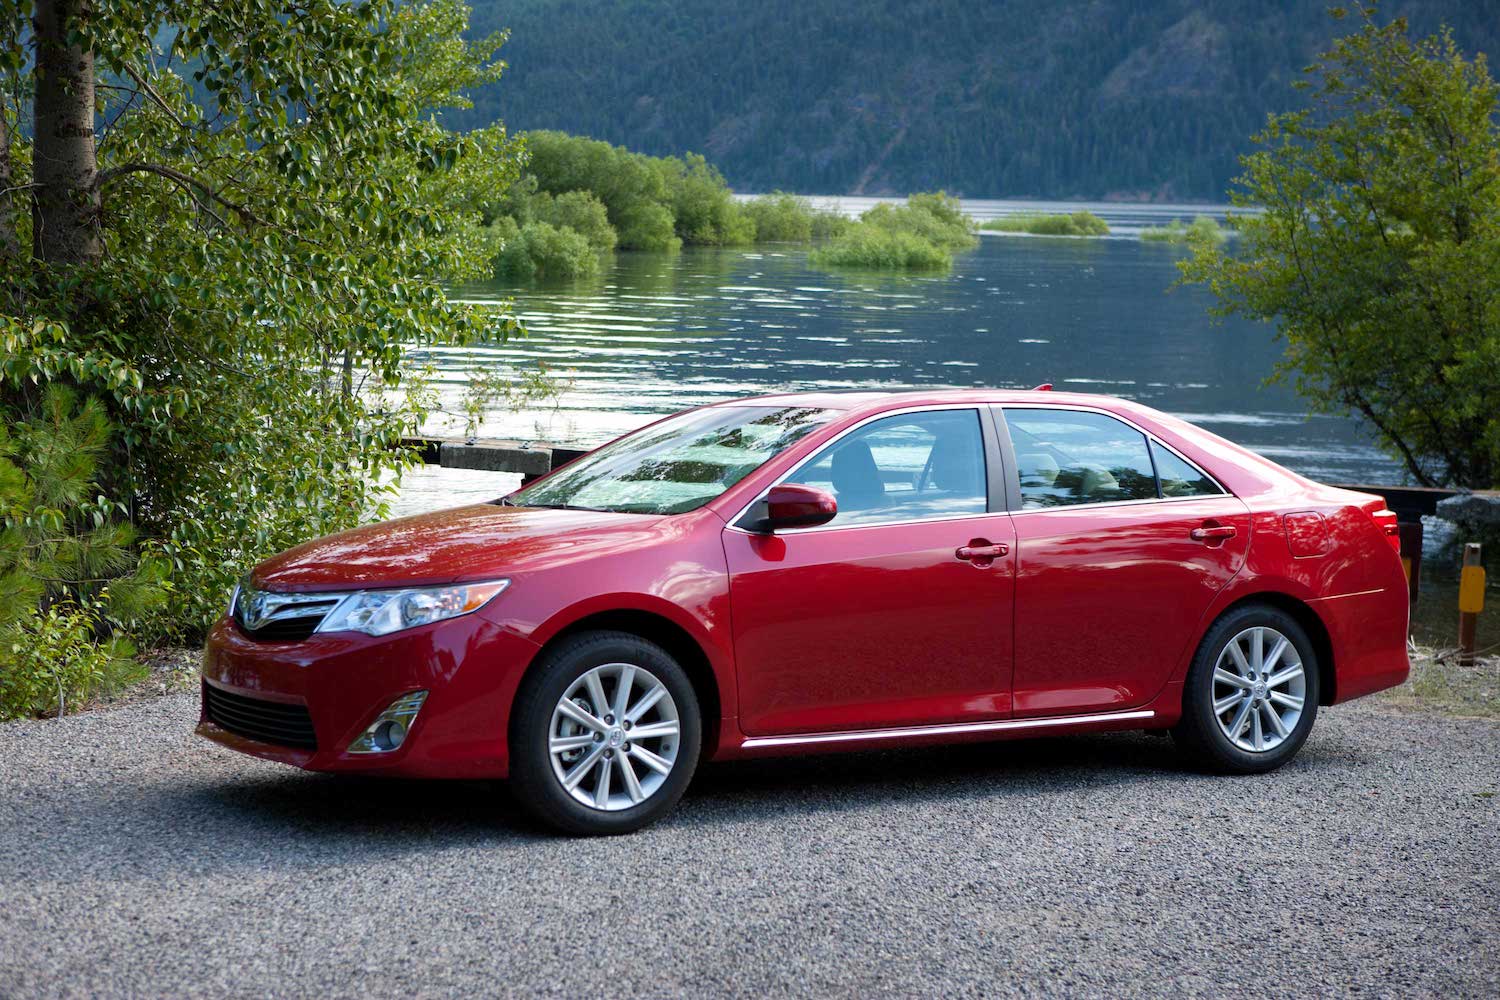 The 2014 Toyota Camry Is the Best Used Car Under $15,000, Says KBB